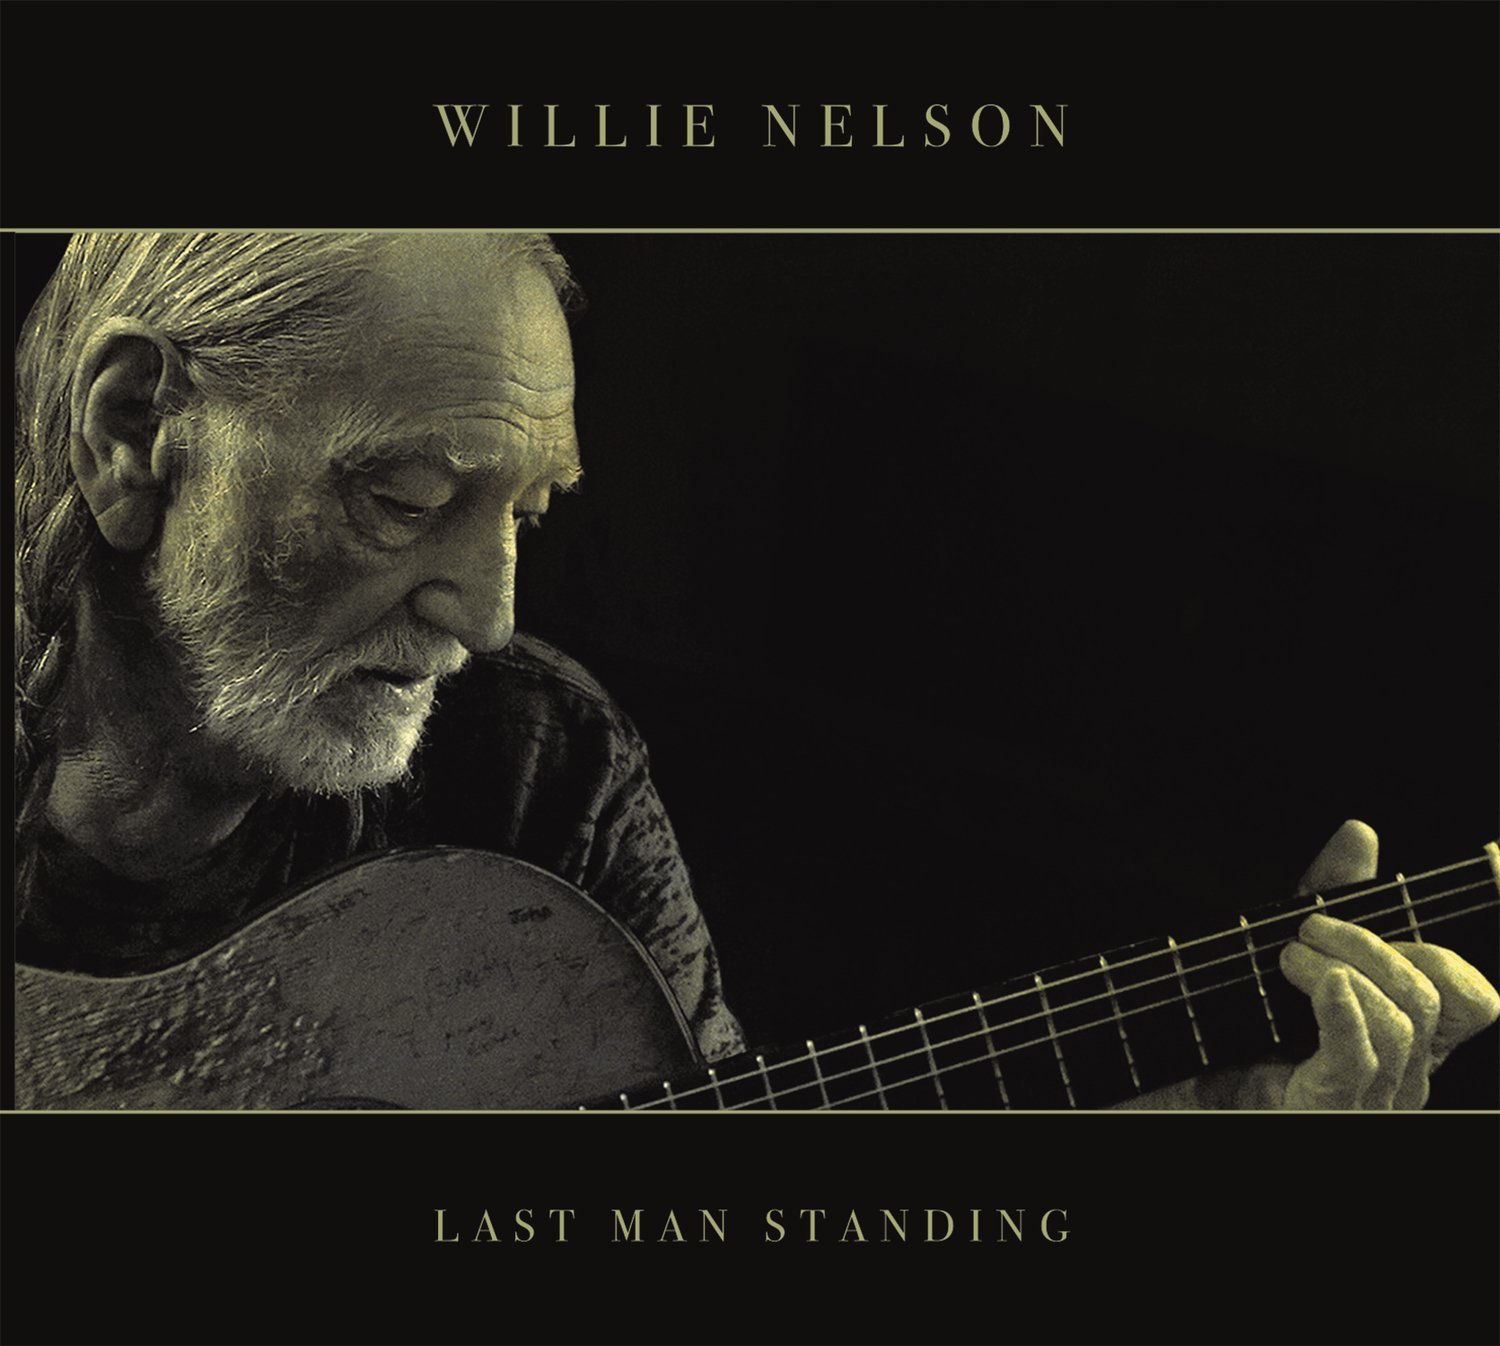  To No One's Surprise Willie Nelson Has Released A New Weed Strain Alongside New Album